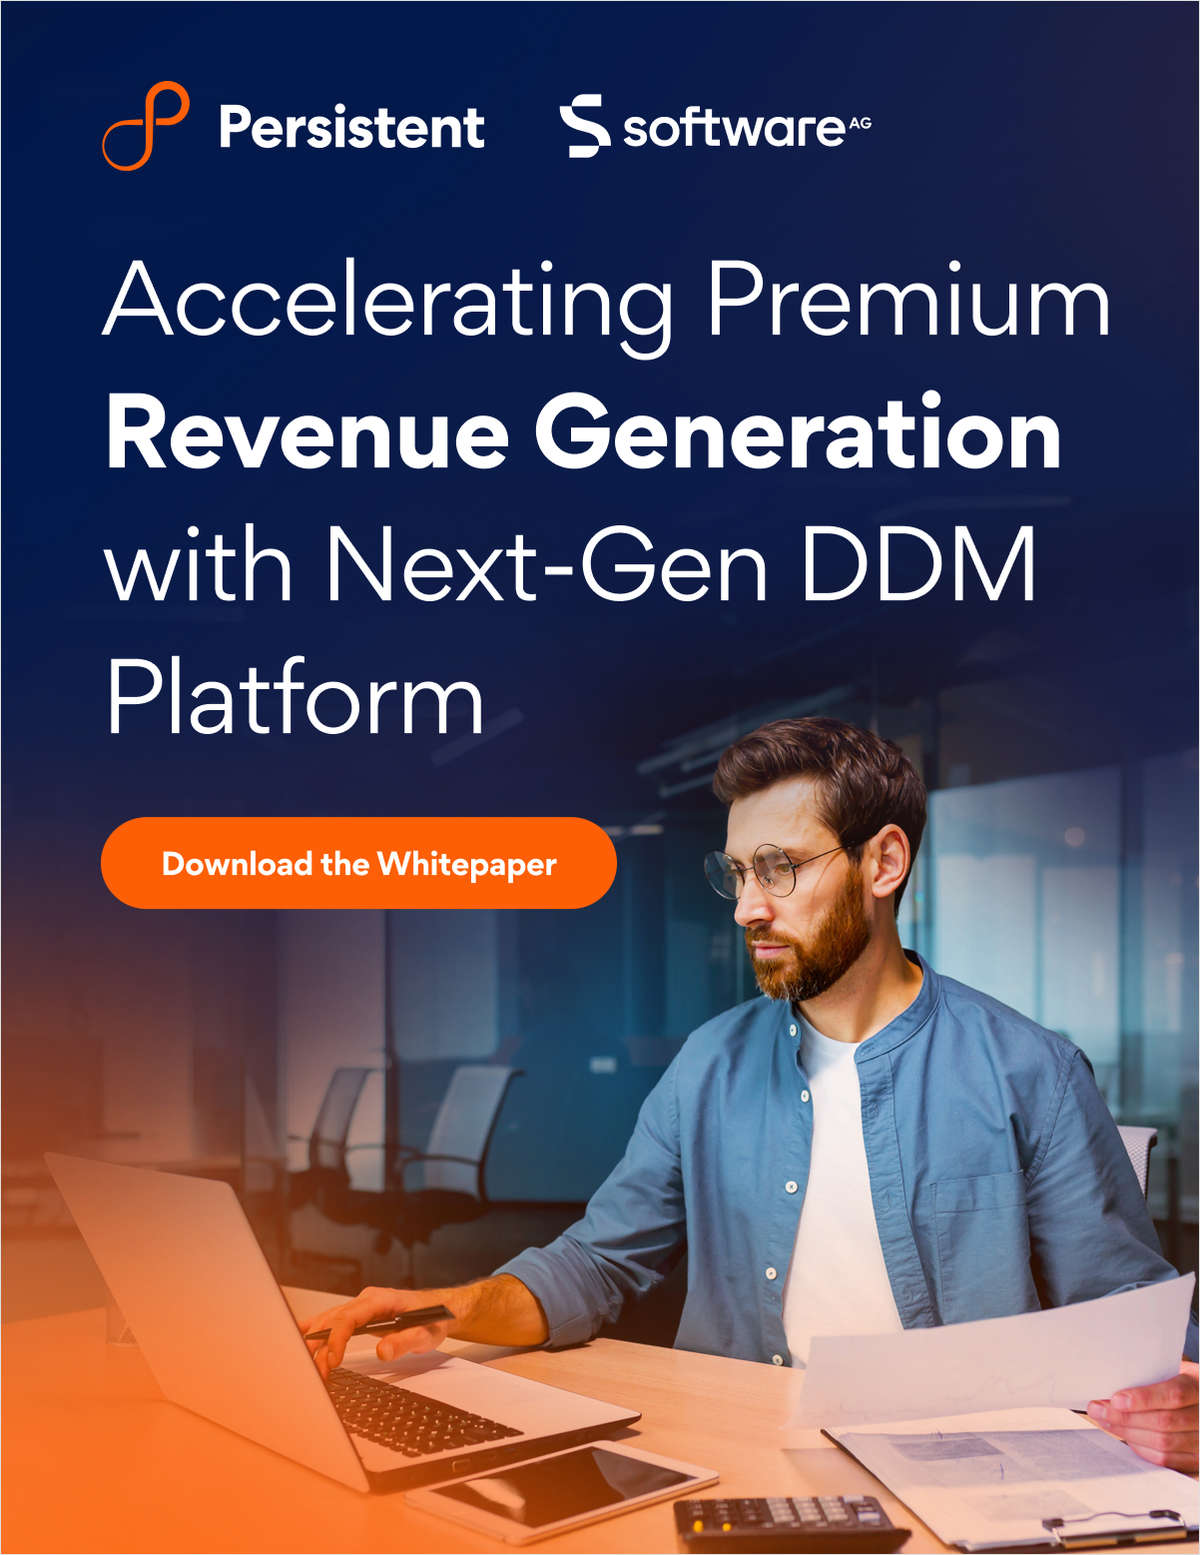 Discover how insurers can empower agents and brokers and drive growth with a Digital Distribution Management (DDM) platform.